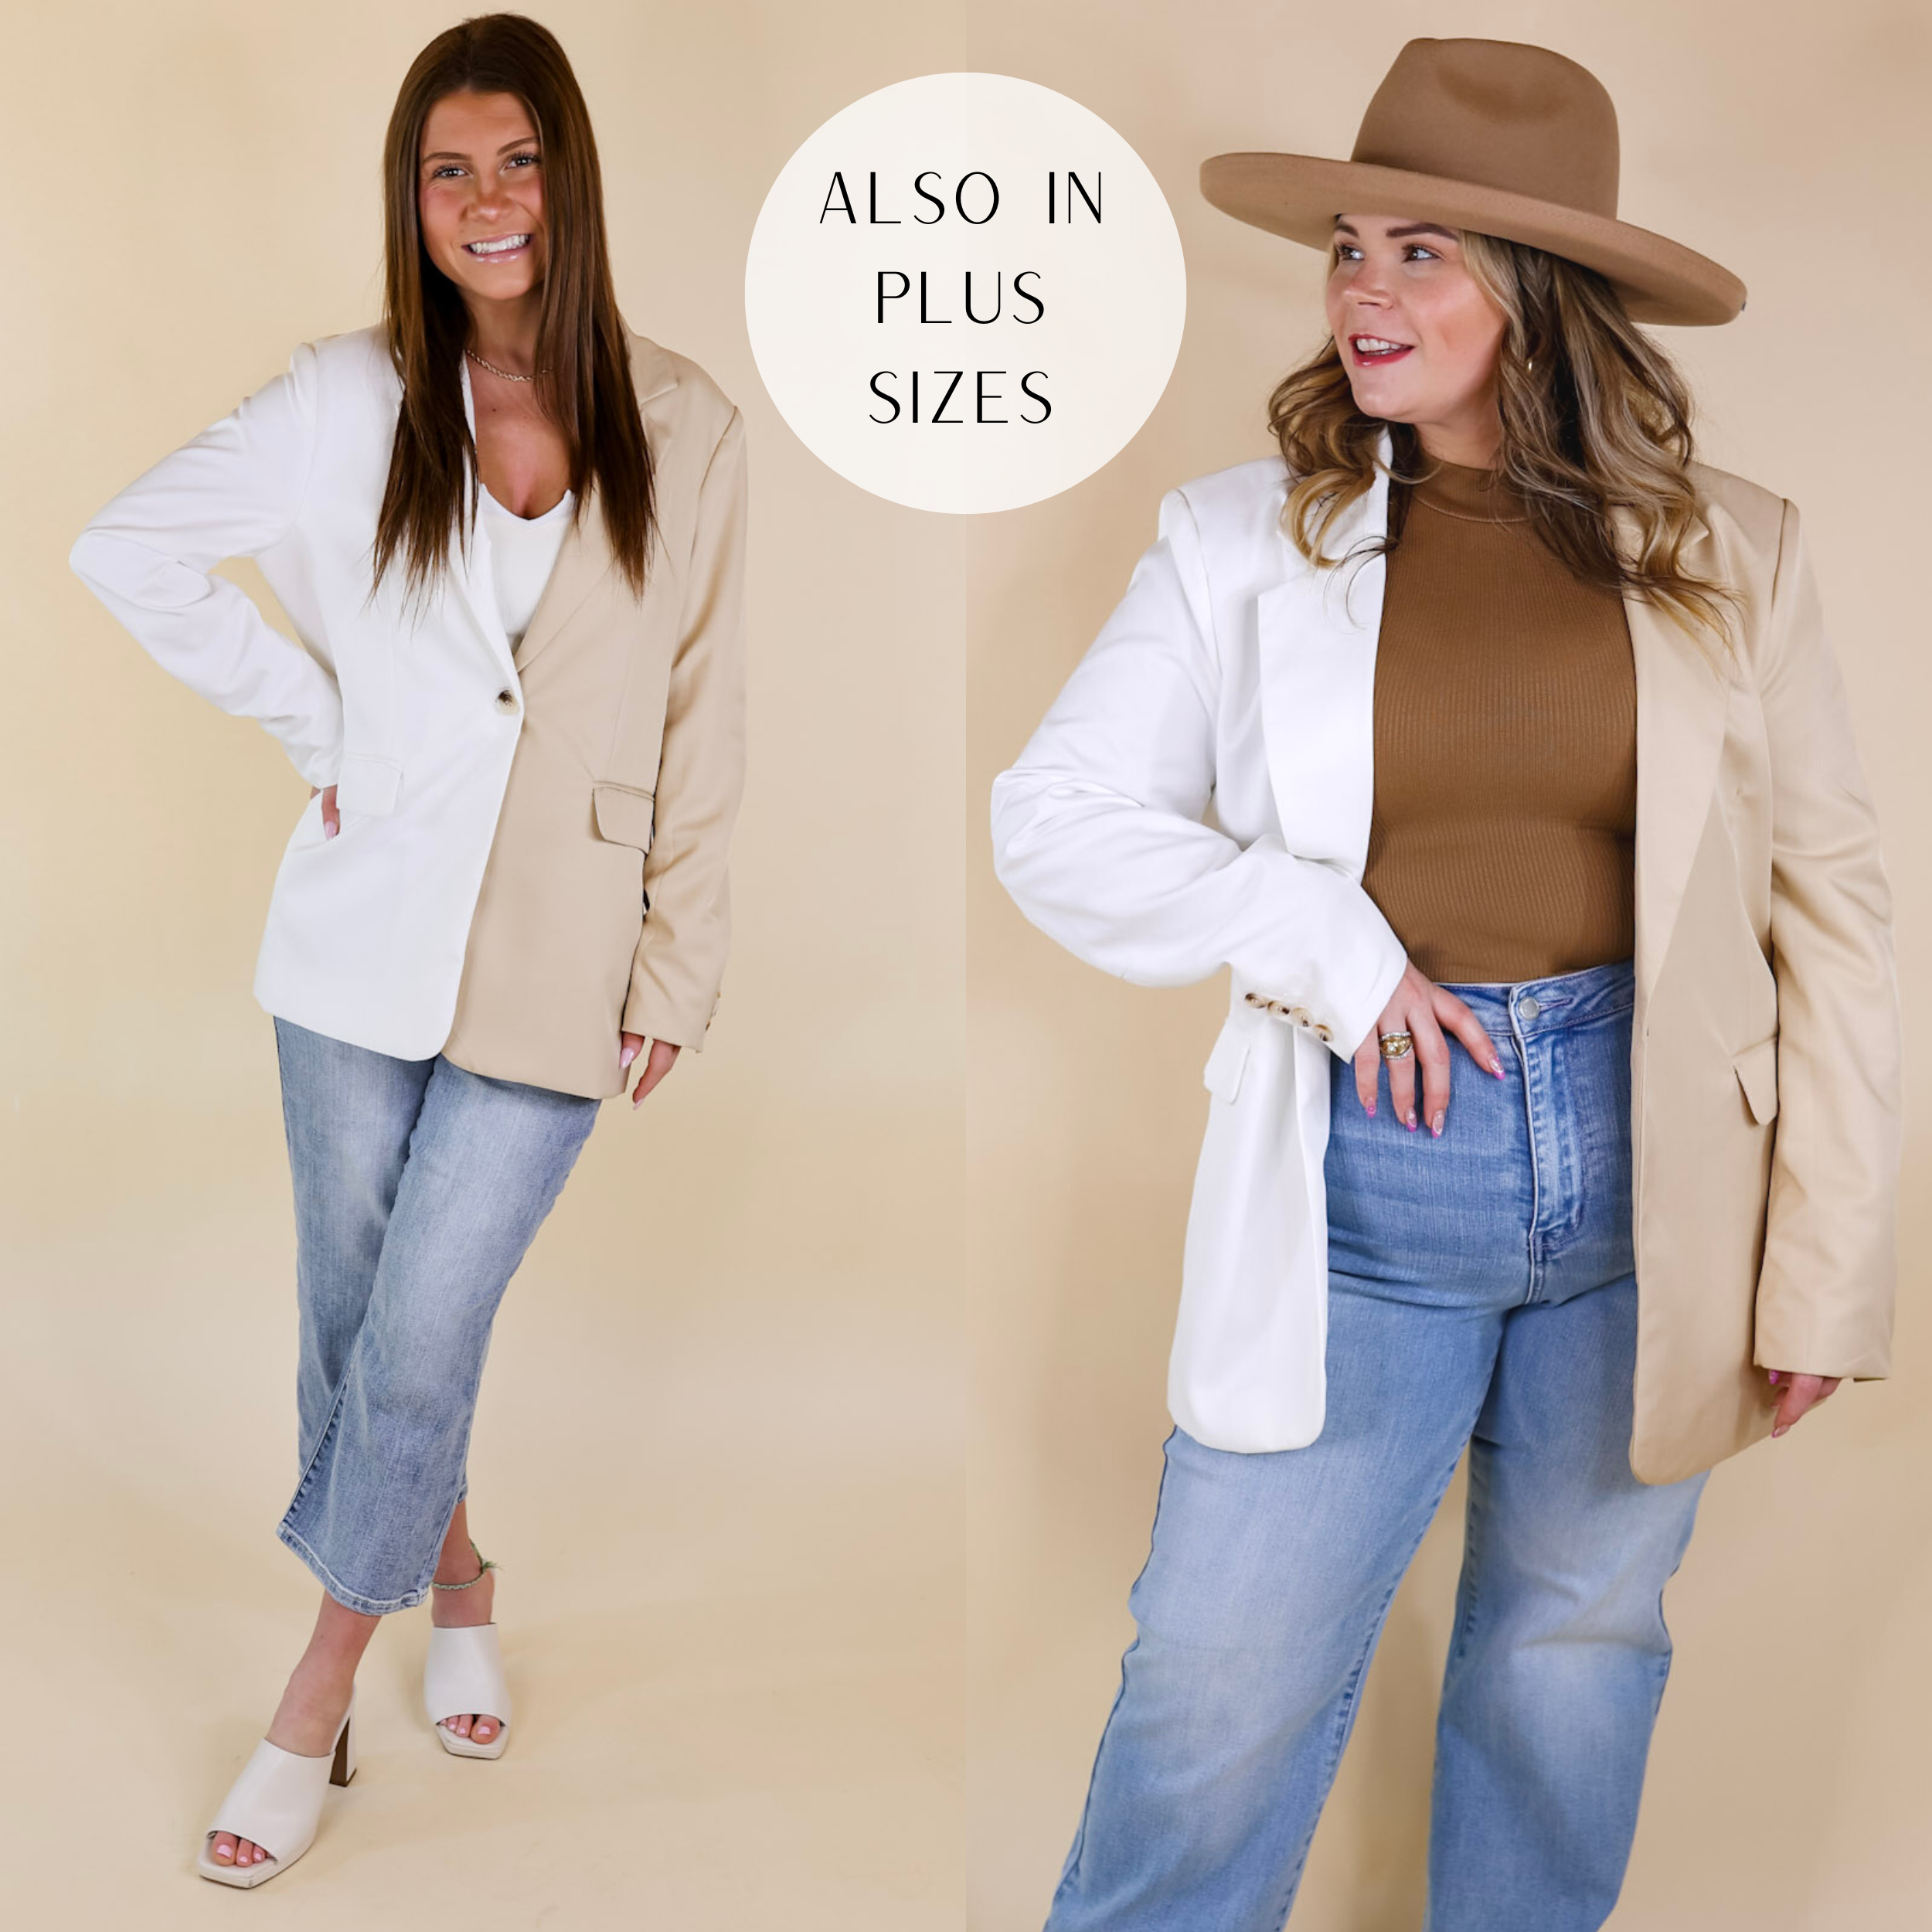 Models are wearing a half white, half beige blazer with long sleeves and a single button front. Size small model has it paired with a white bodysuit, cropped jeans, and white heels. Size large model has it paired with light wash jeans, a brown tank, and a brown hat.